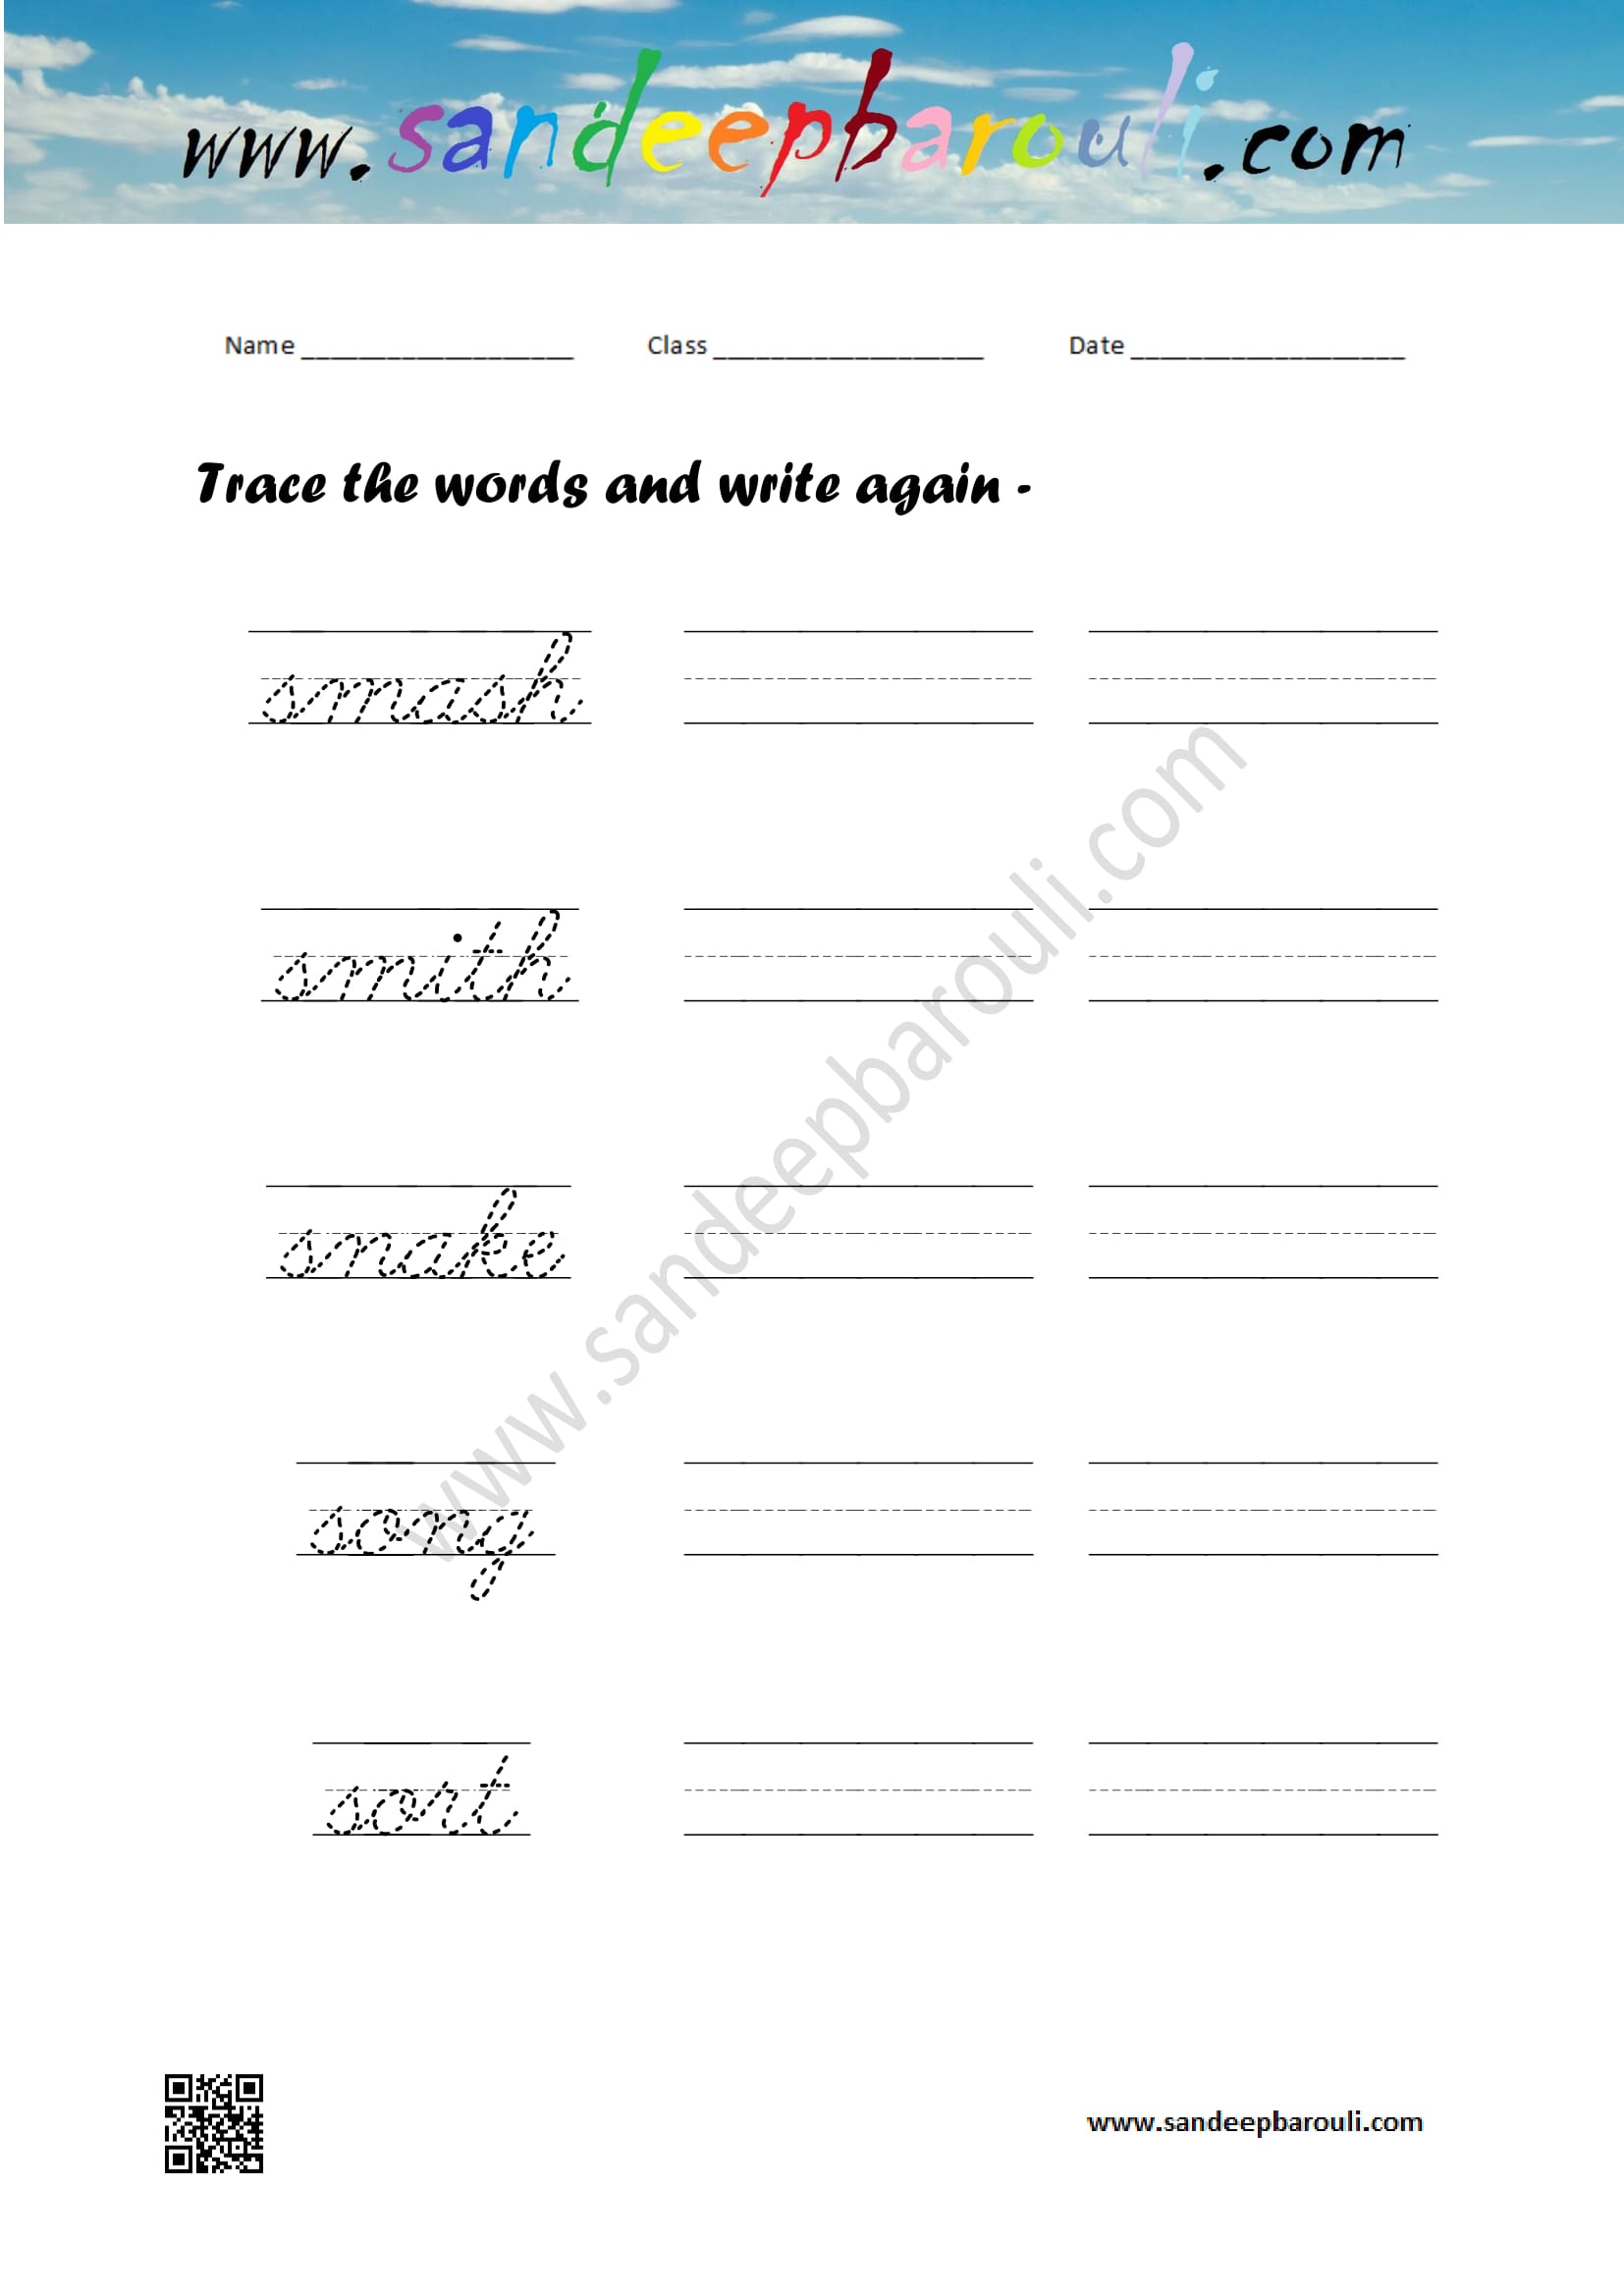 Cursive writing worksheet – trace the words and write again (108)